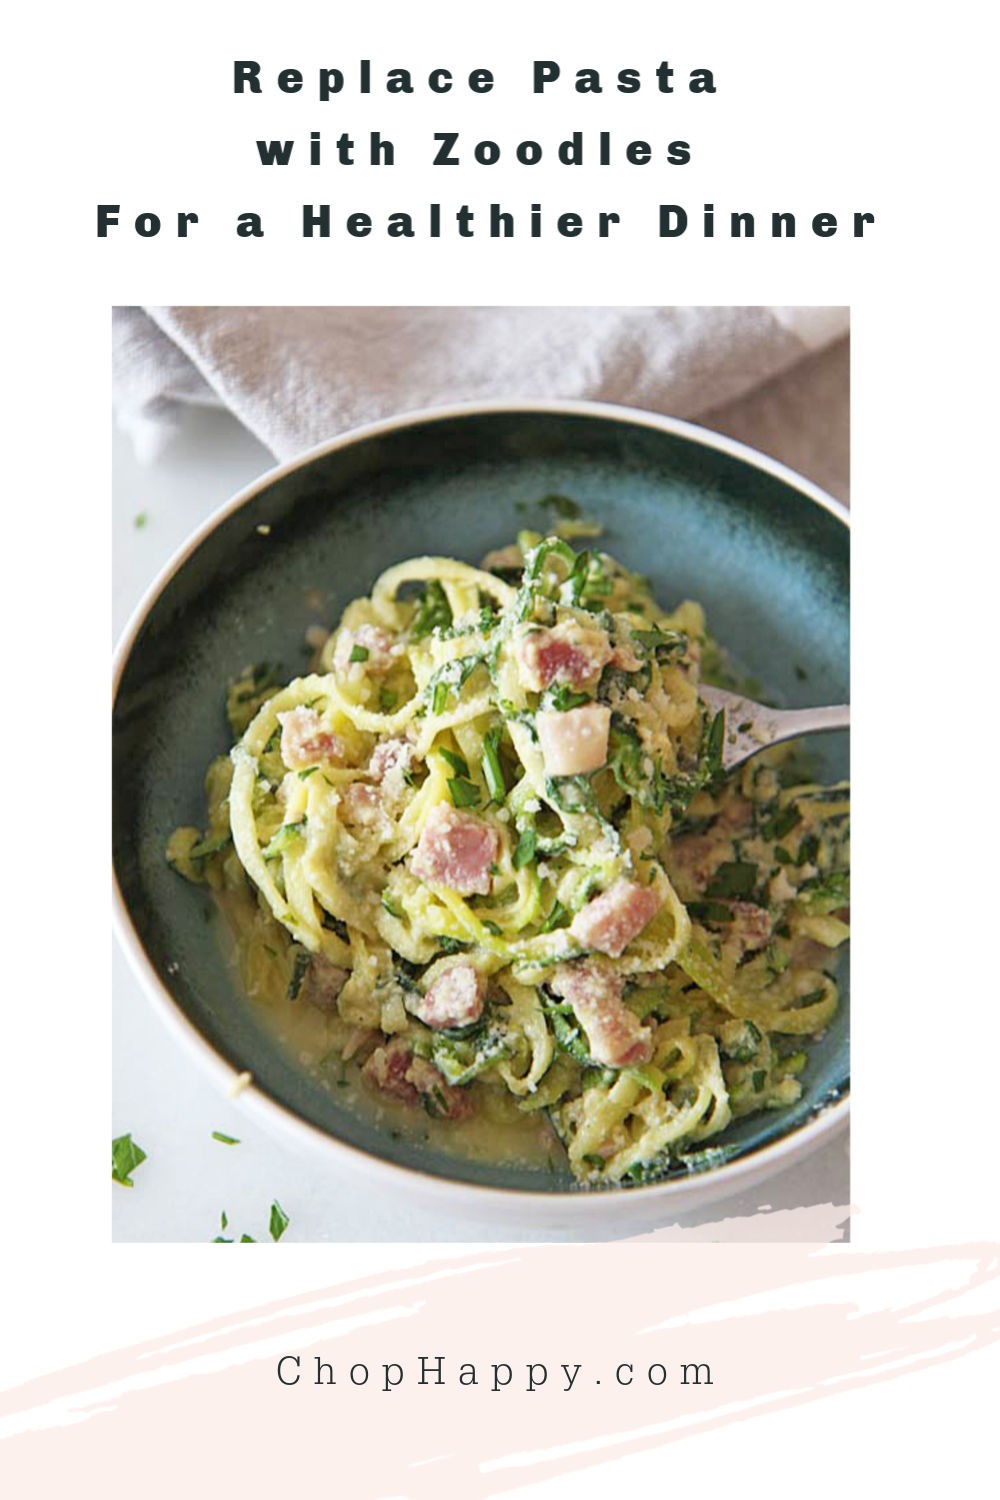 Replace Pasta with Zoodles For a Healthier Dinner. Zoodles can be made from zucchinii, carrots, squash, and any vegetables. It cooks in 30 seconds and is so much healthier. Happy healthy eating! www.ChopHappy.com #zoodles #heathyeatingtips